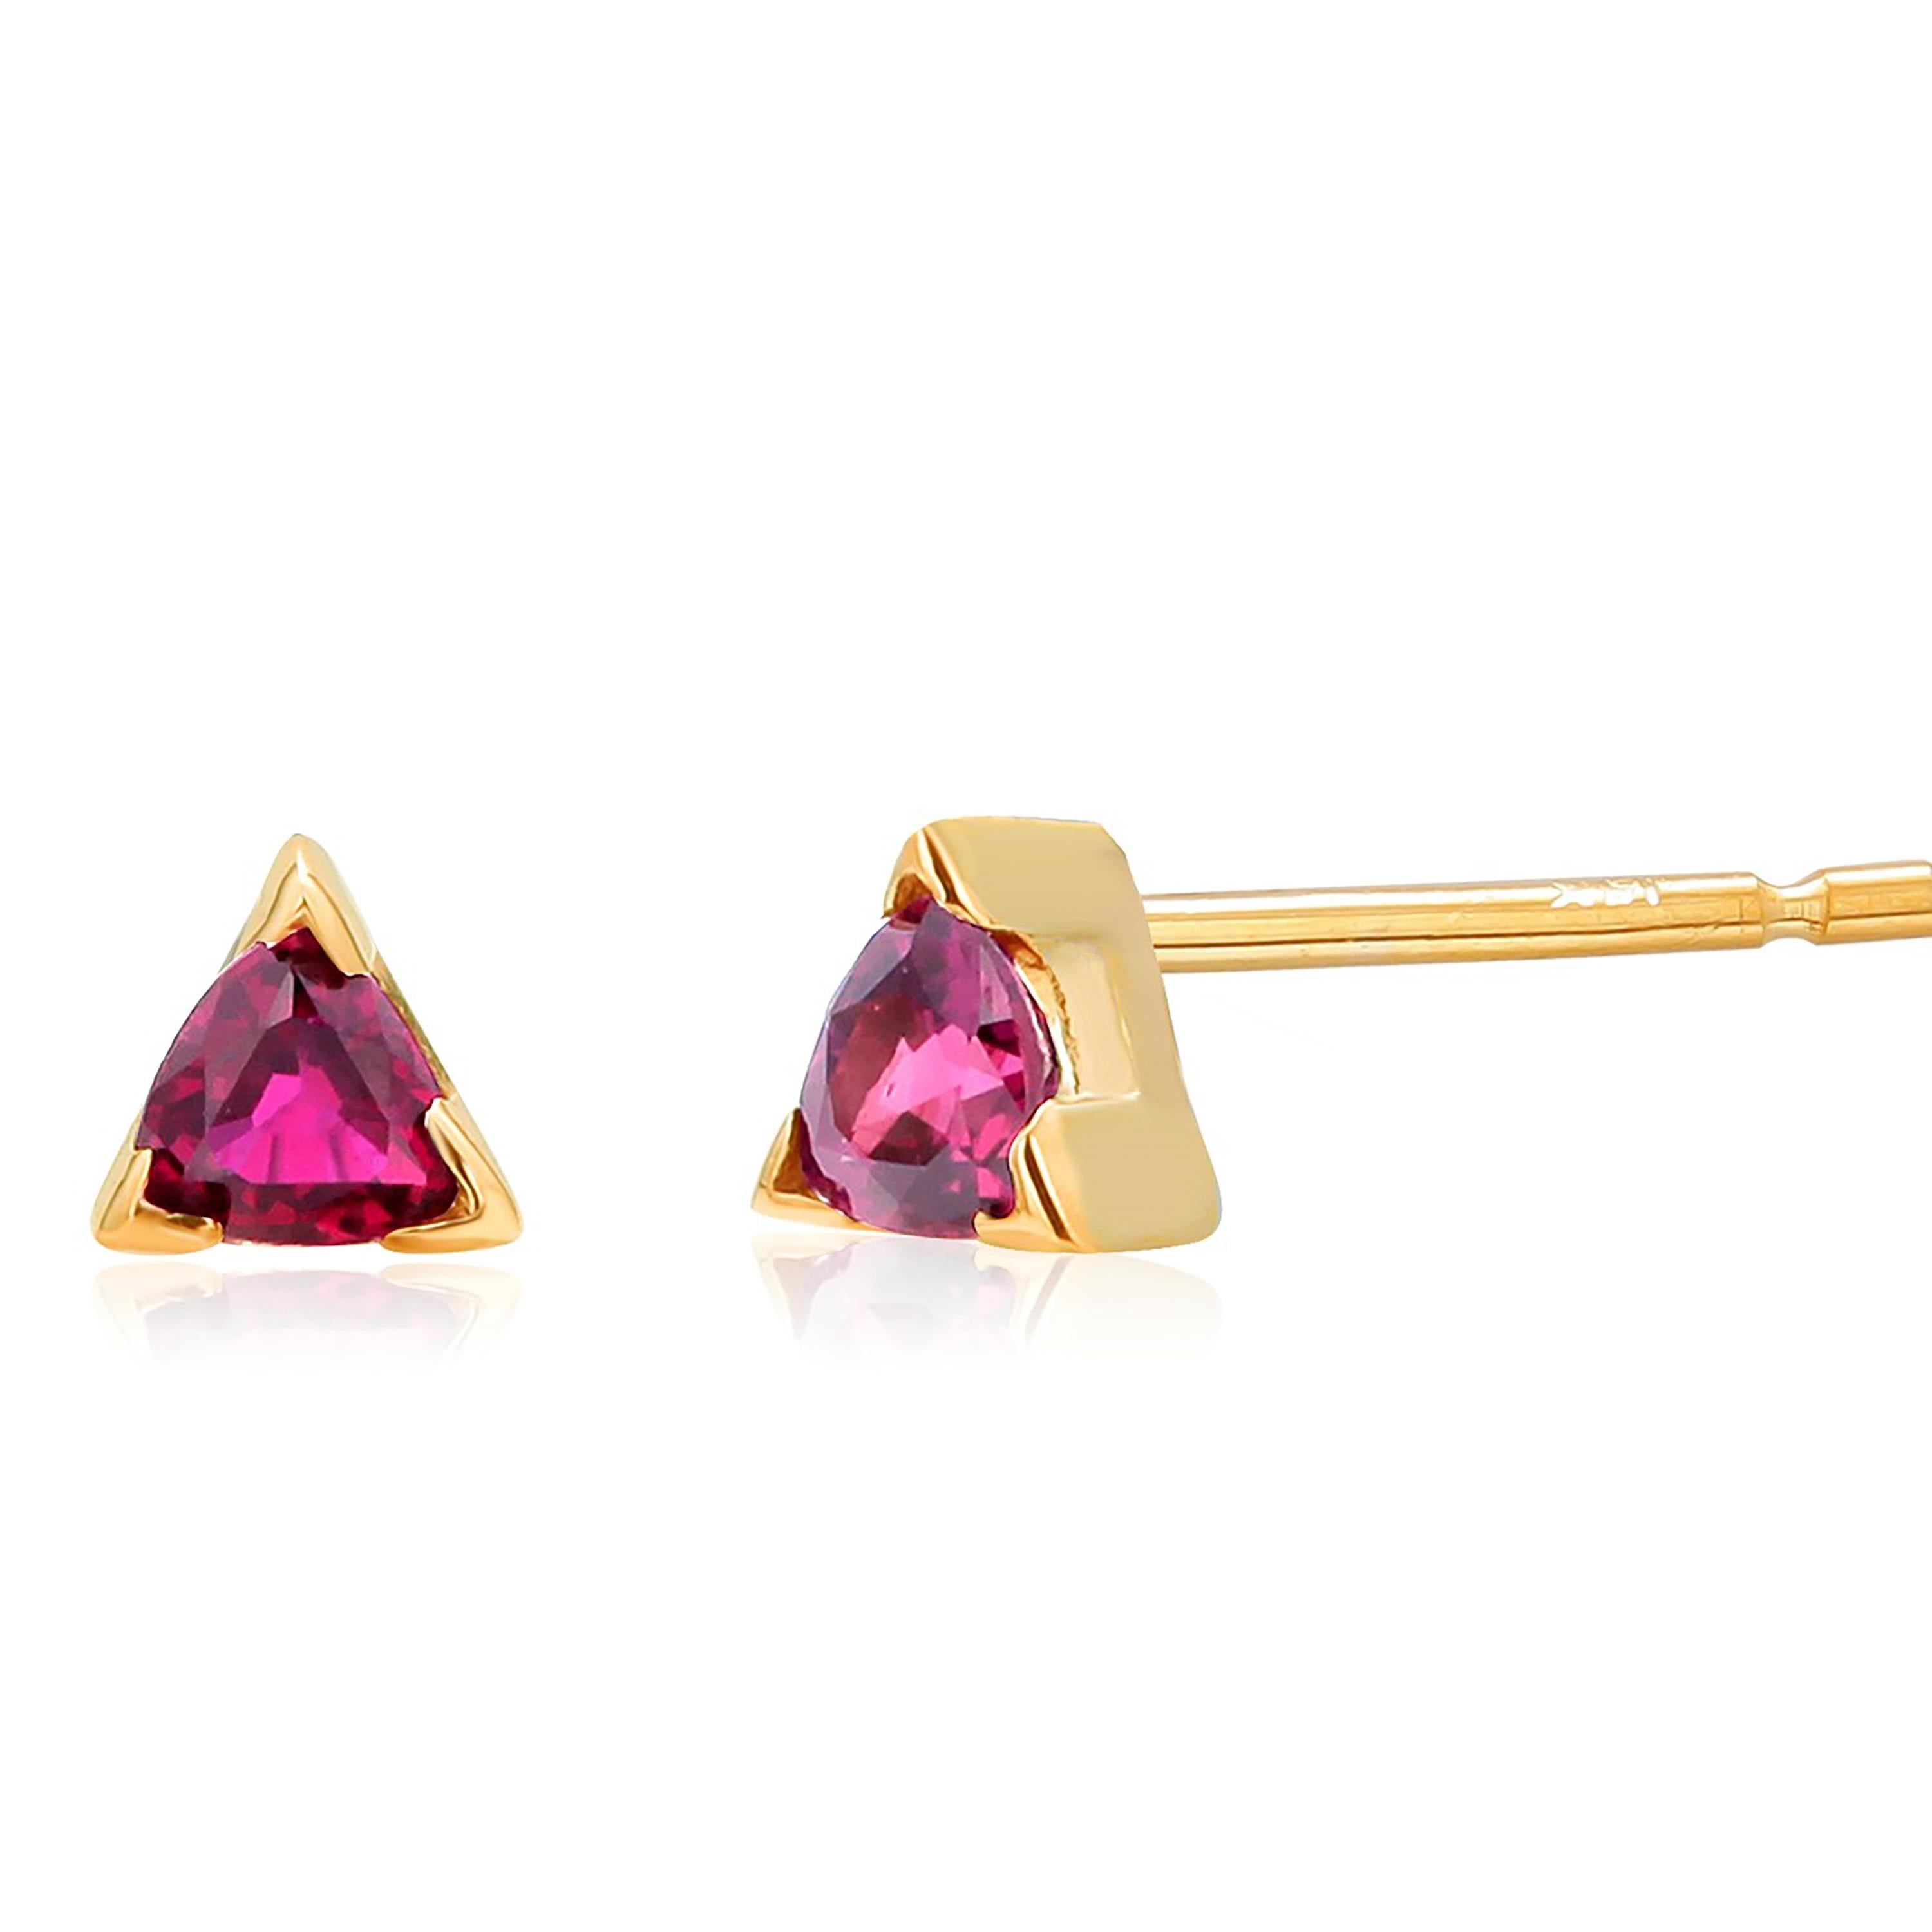 Trillion Cut Matched Pair Round Ruby Yellow Gold Triangle Shaped Stud Earrings